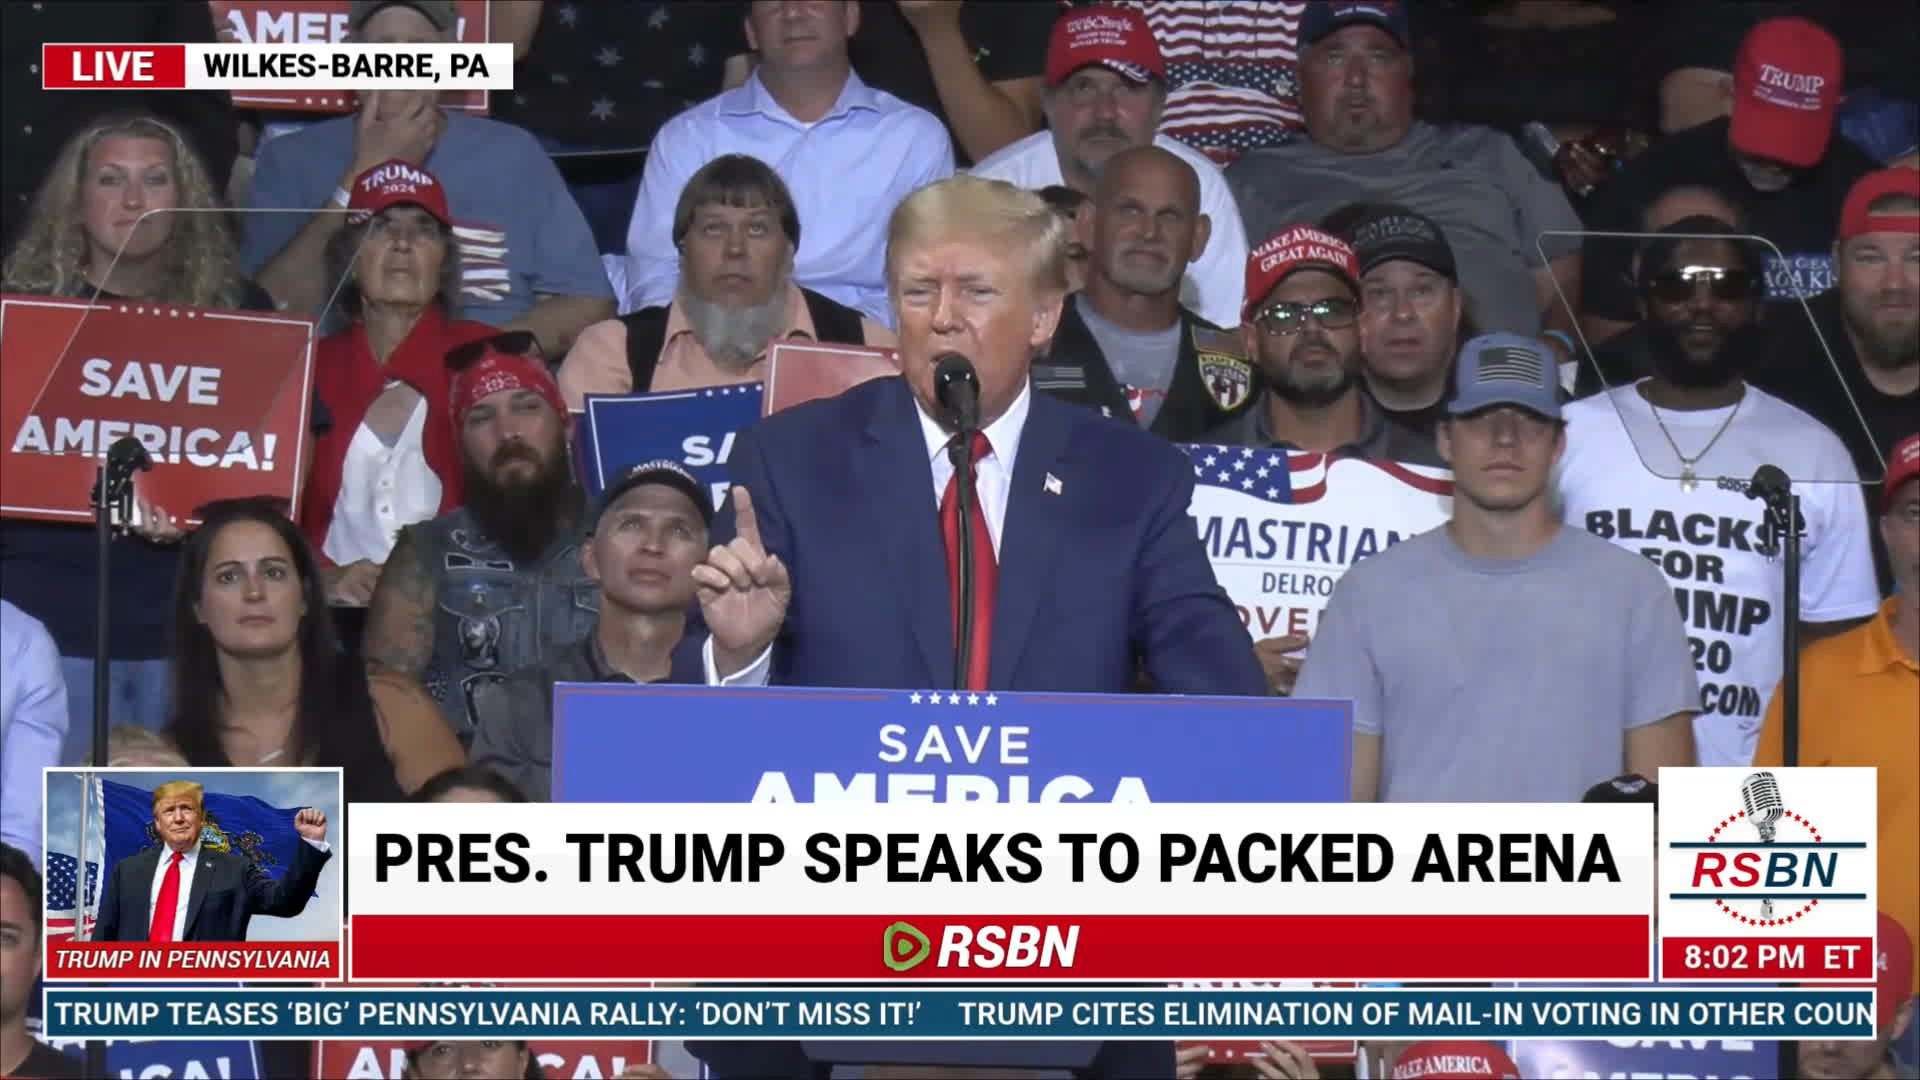 VIDEO: Donald Trump brands Biden the ‘enemy of the state’ at his Save America Rally in Wilkes-Barre, PA